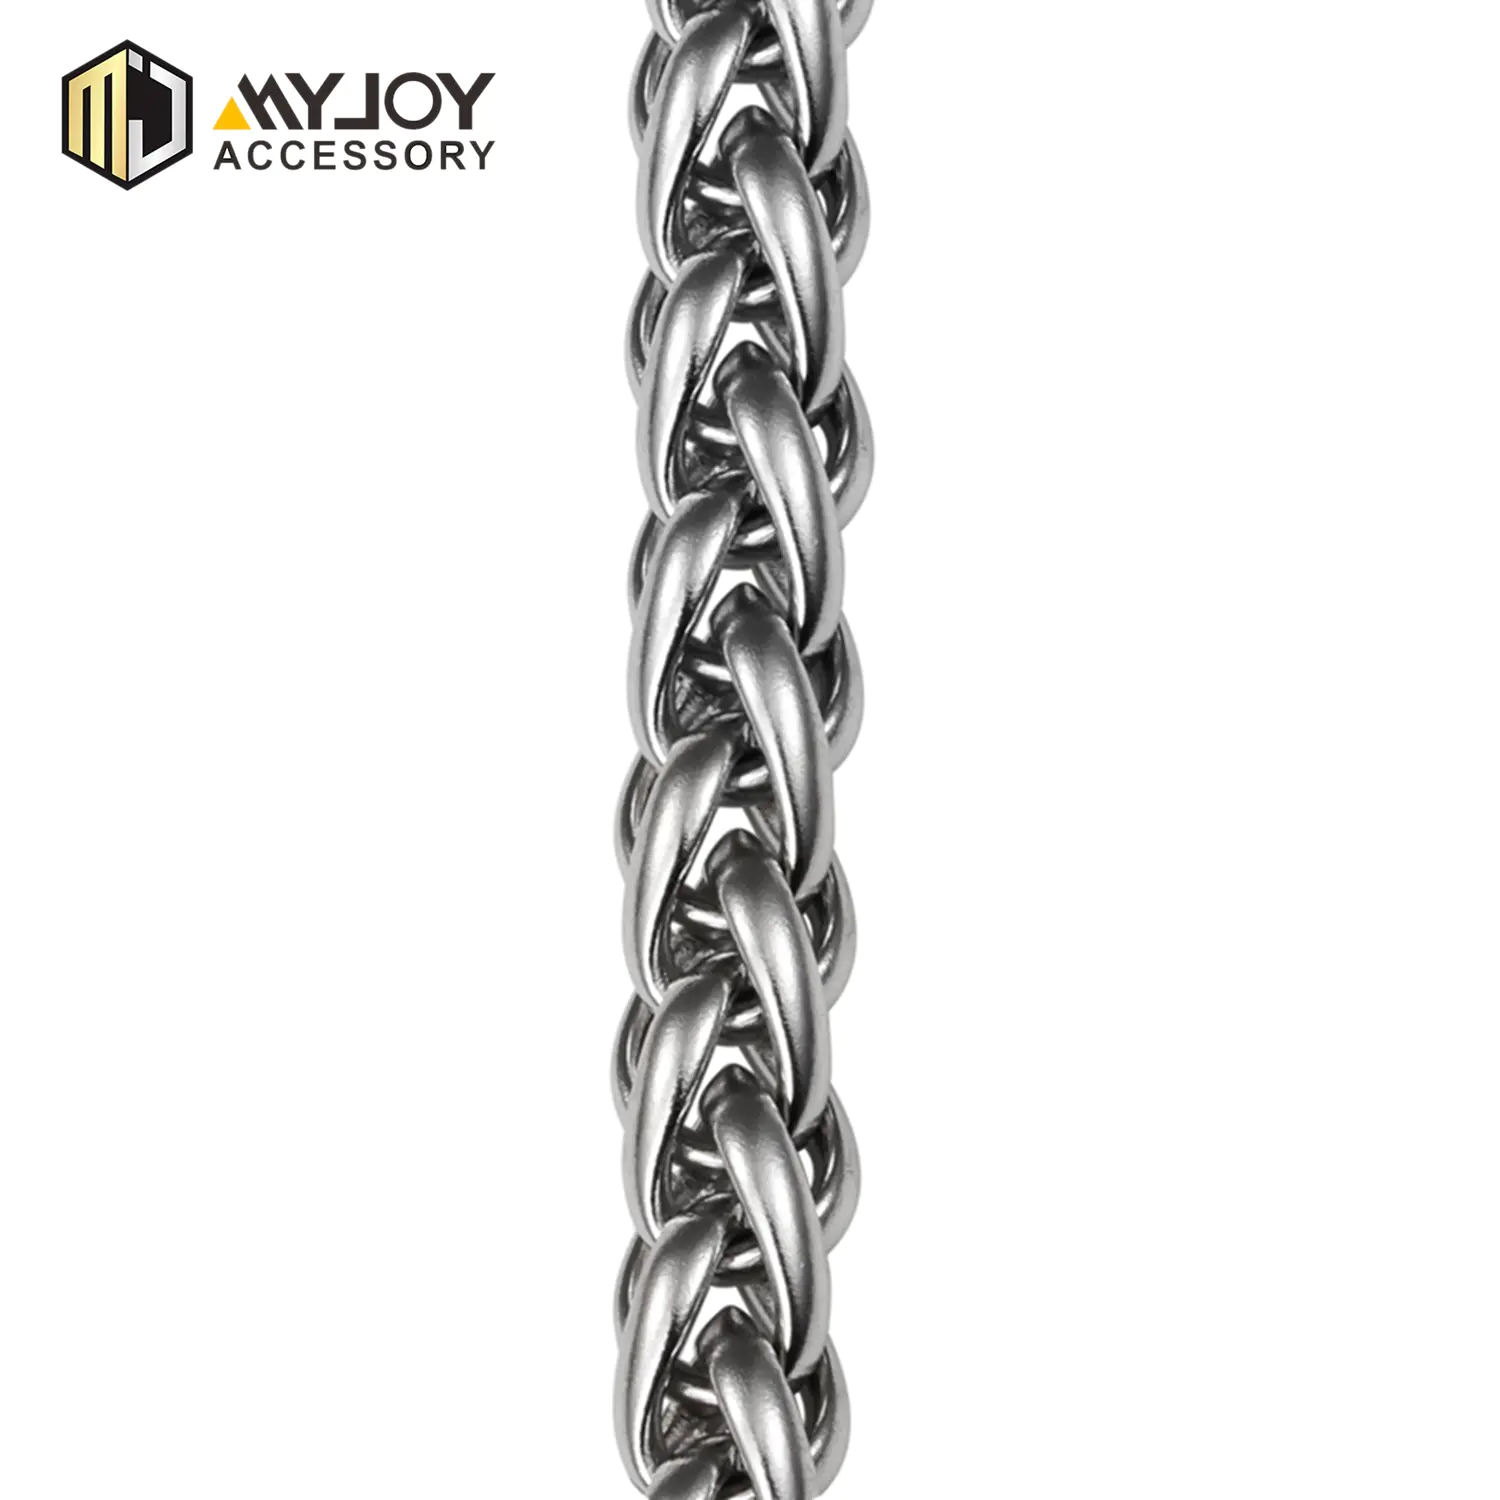 MYJOY chains chain strap Suppliers for purses